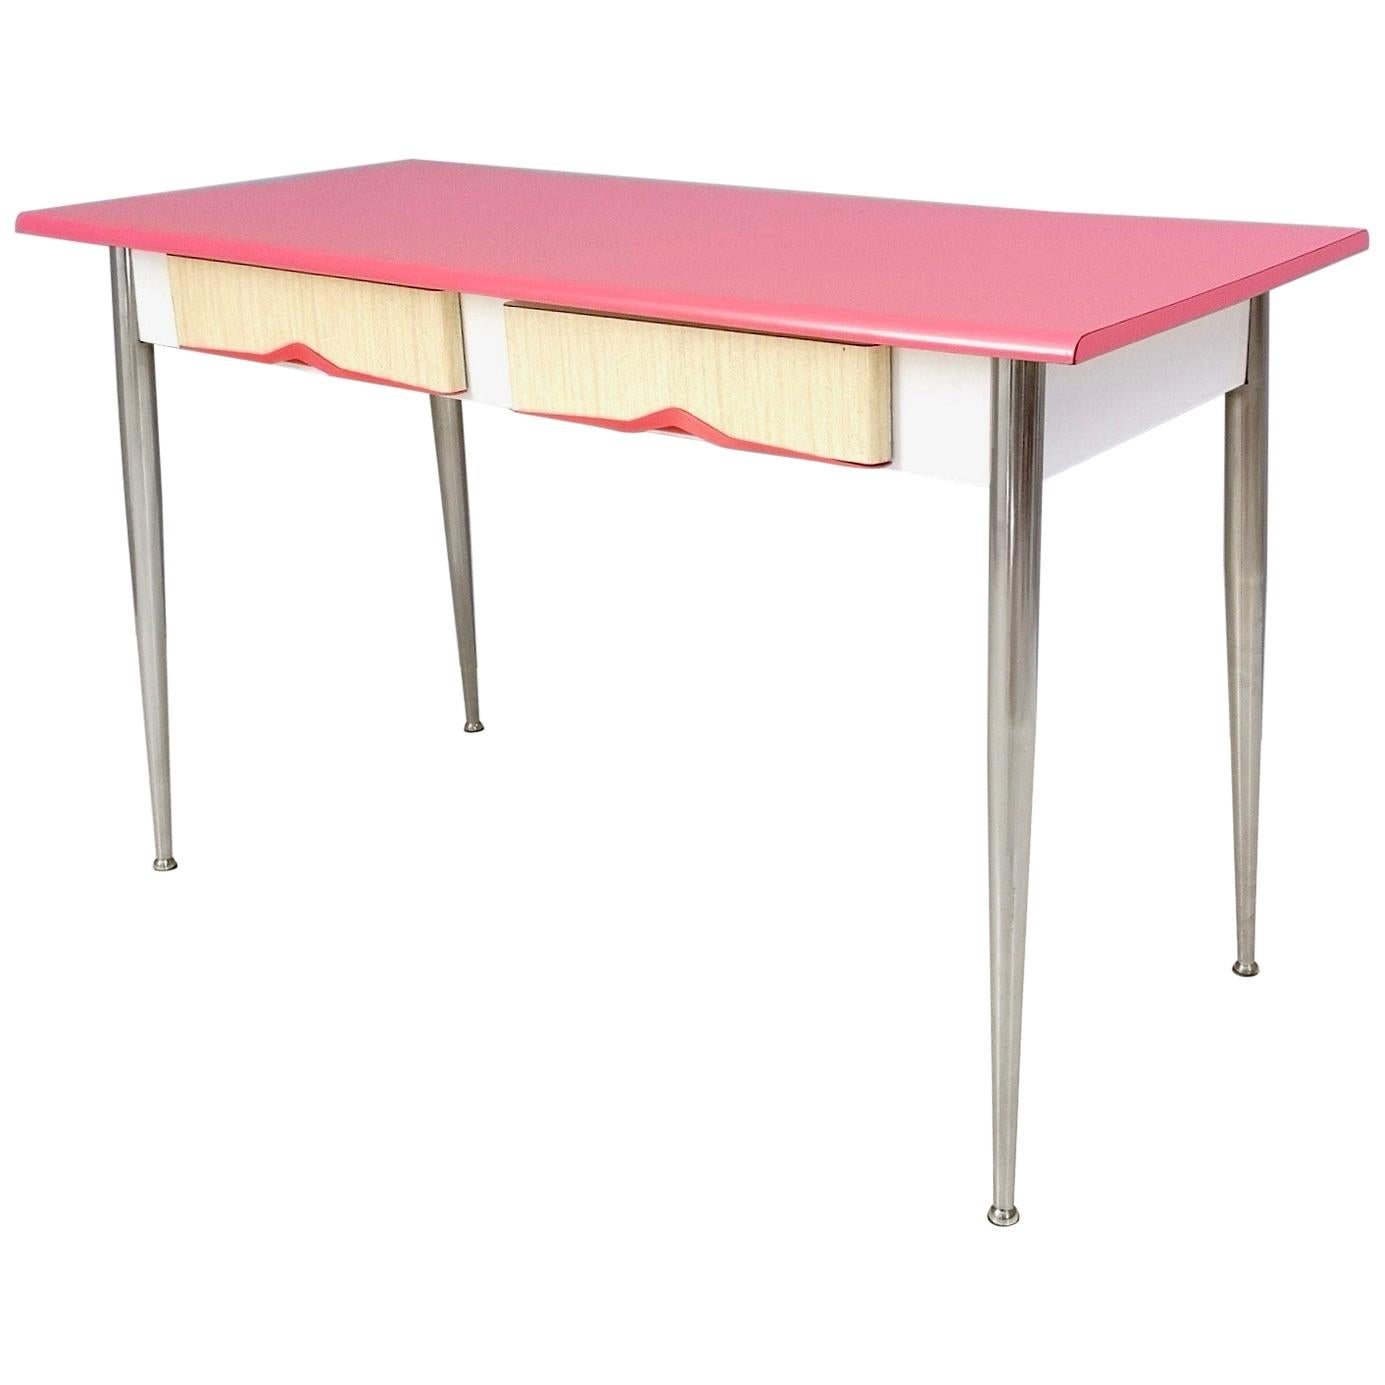 Midcentury Dining Table with a Watermelon Pink Formica Top, Italy, 1950s